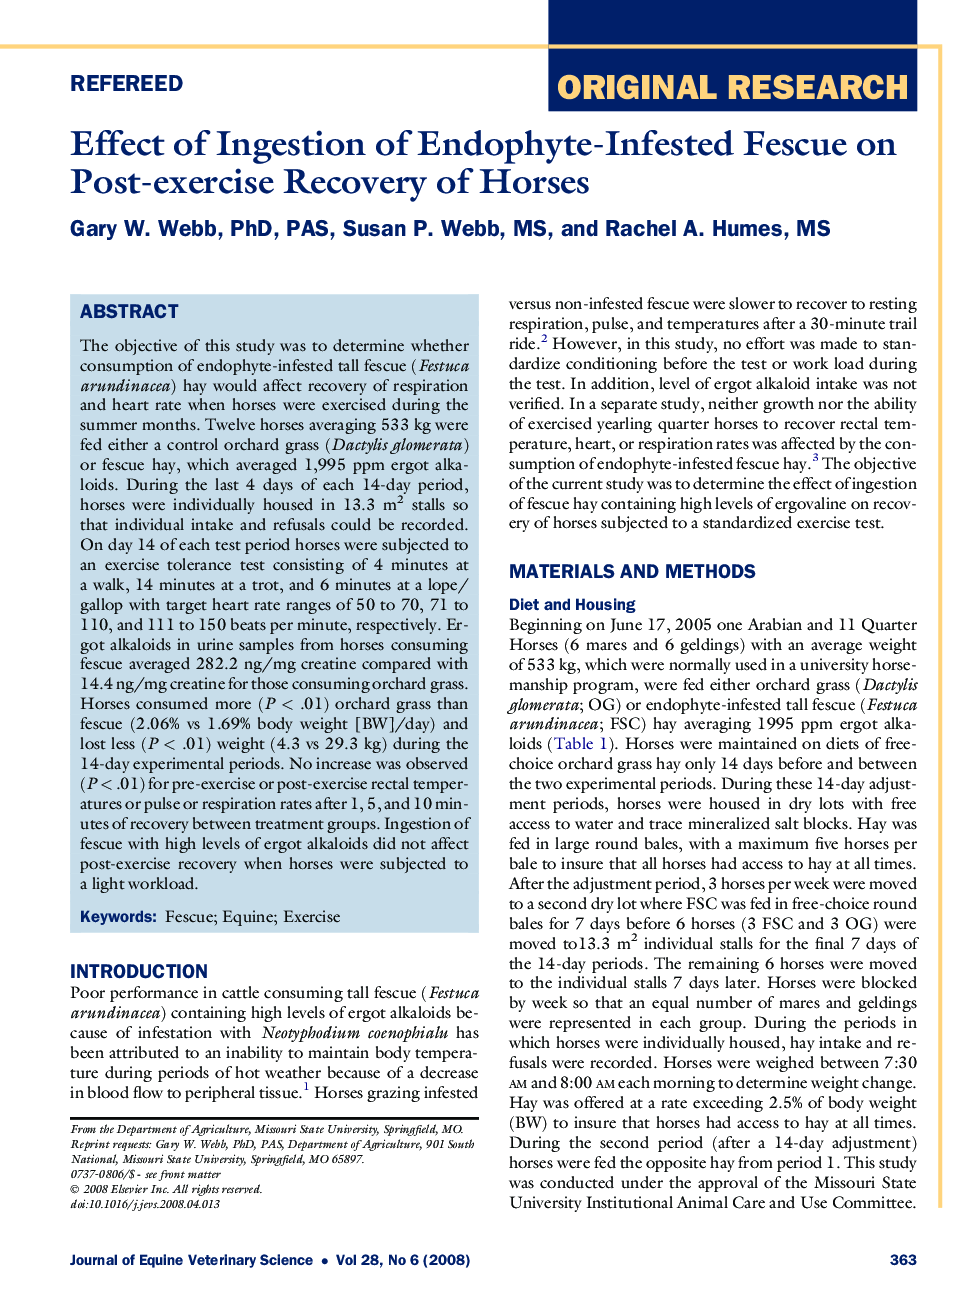 Effect of Ingestion of Endophyte-Infested Fescue on Post-exercise Recovery of Horses 